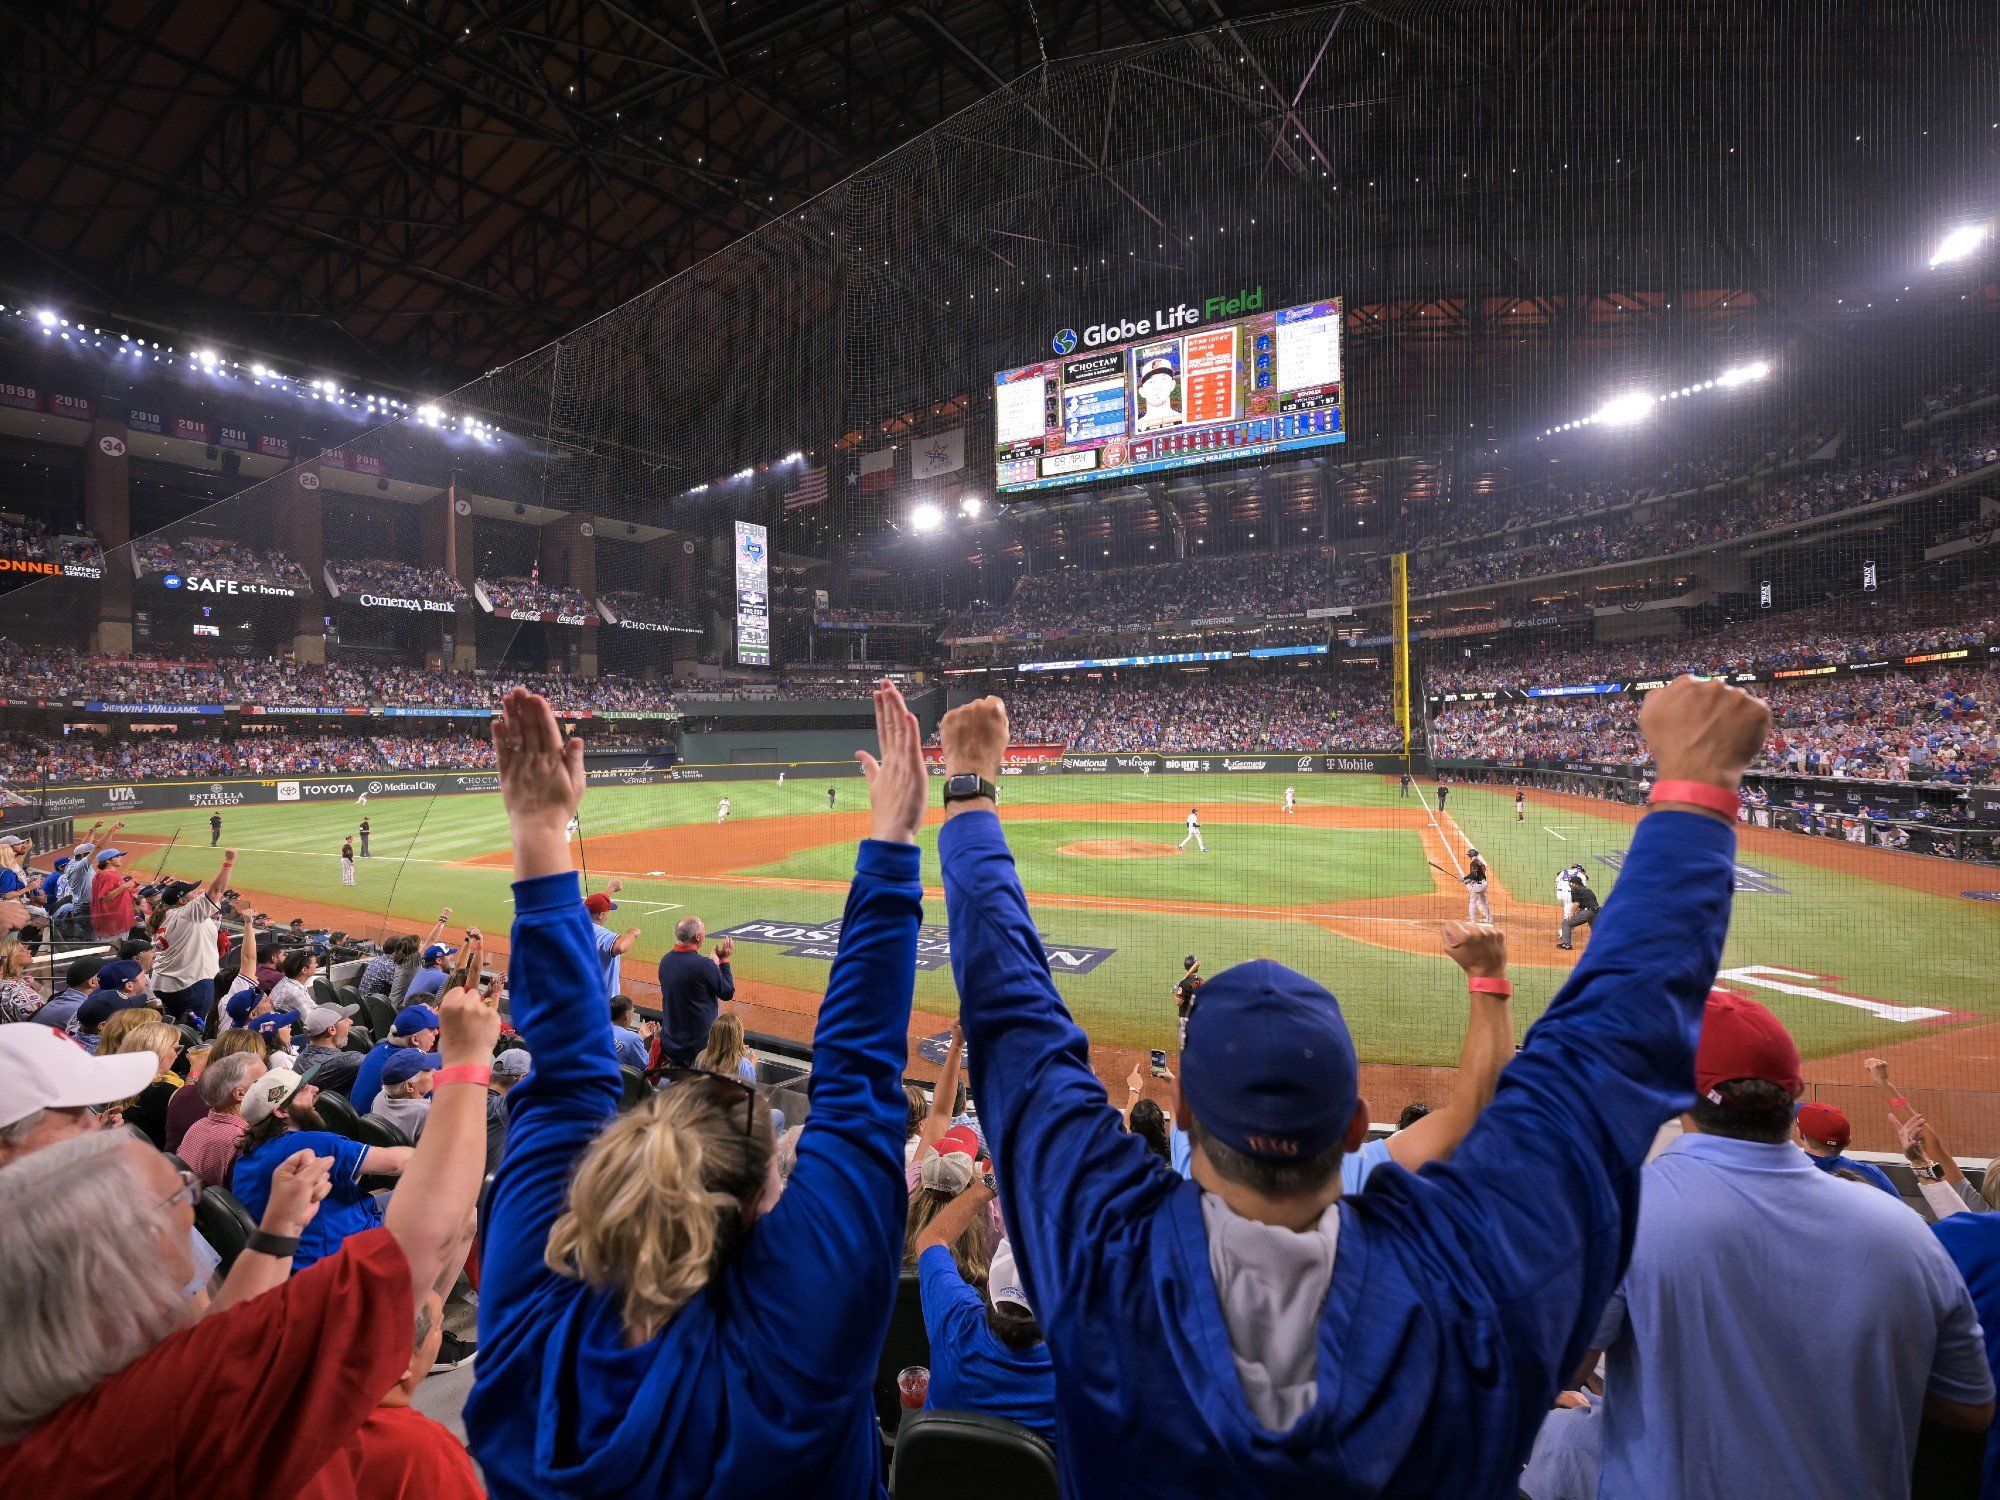 Minute Maid Park in 2012: cheaper tickets, cheaper beer, new